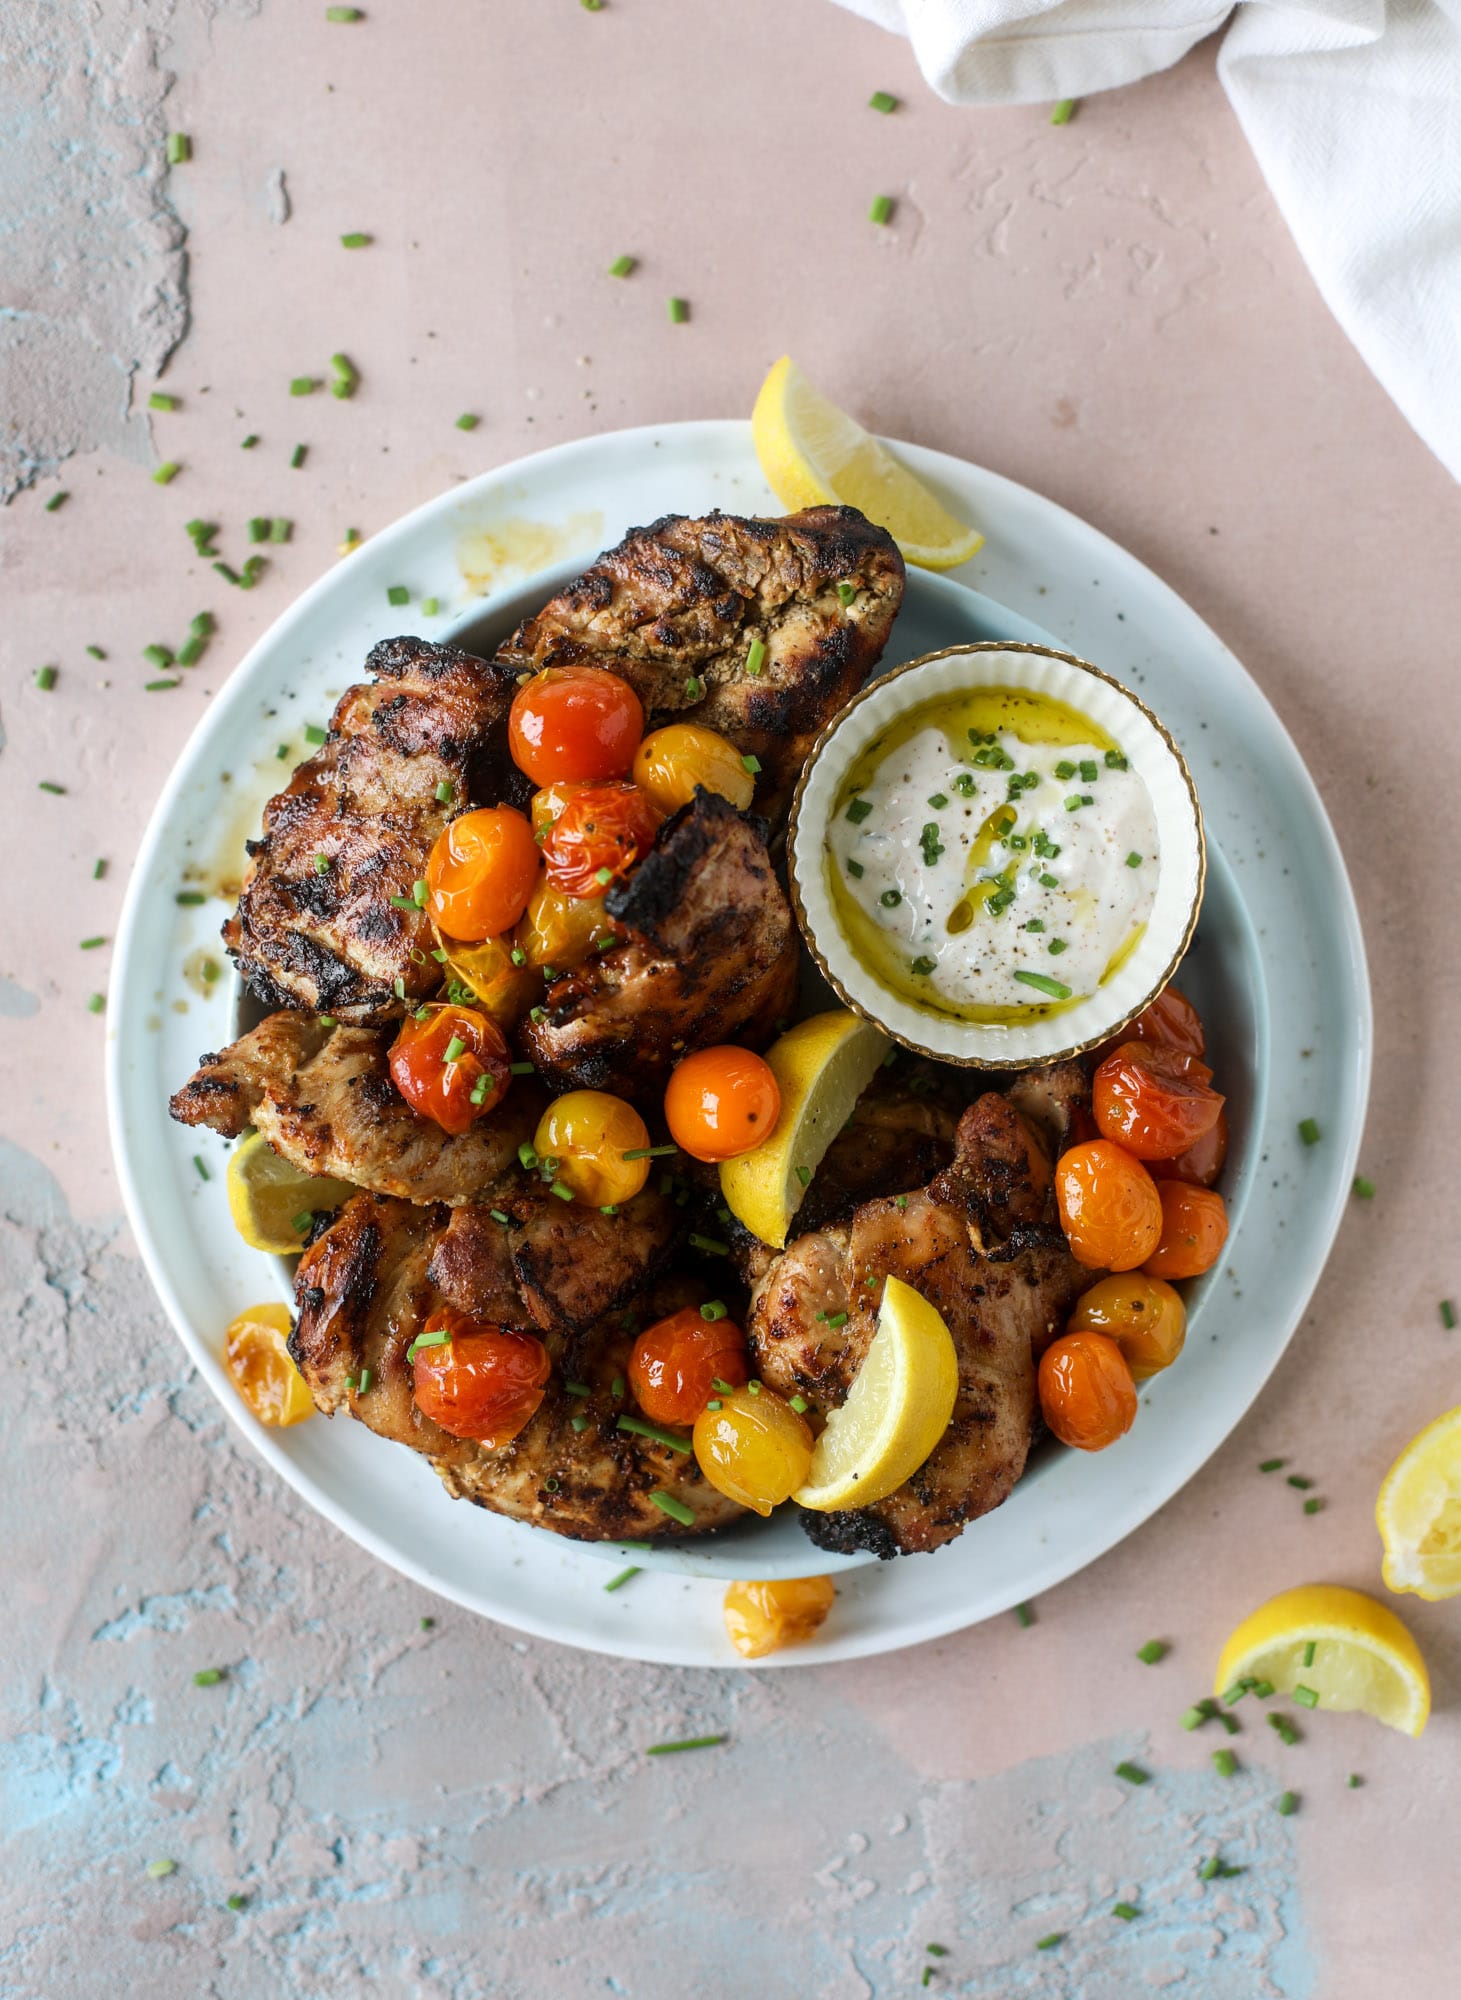 This yogurt marinated chicken recipe is super flavorful, tender, juicy and delicious. The fresh lemon adds a kick of flavor and it